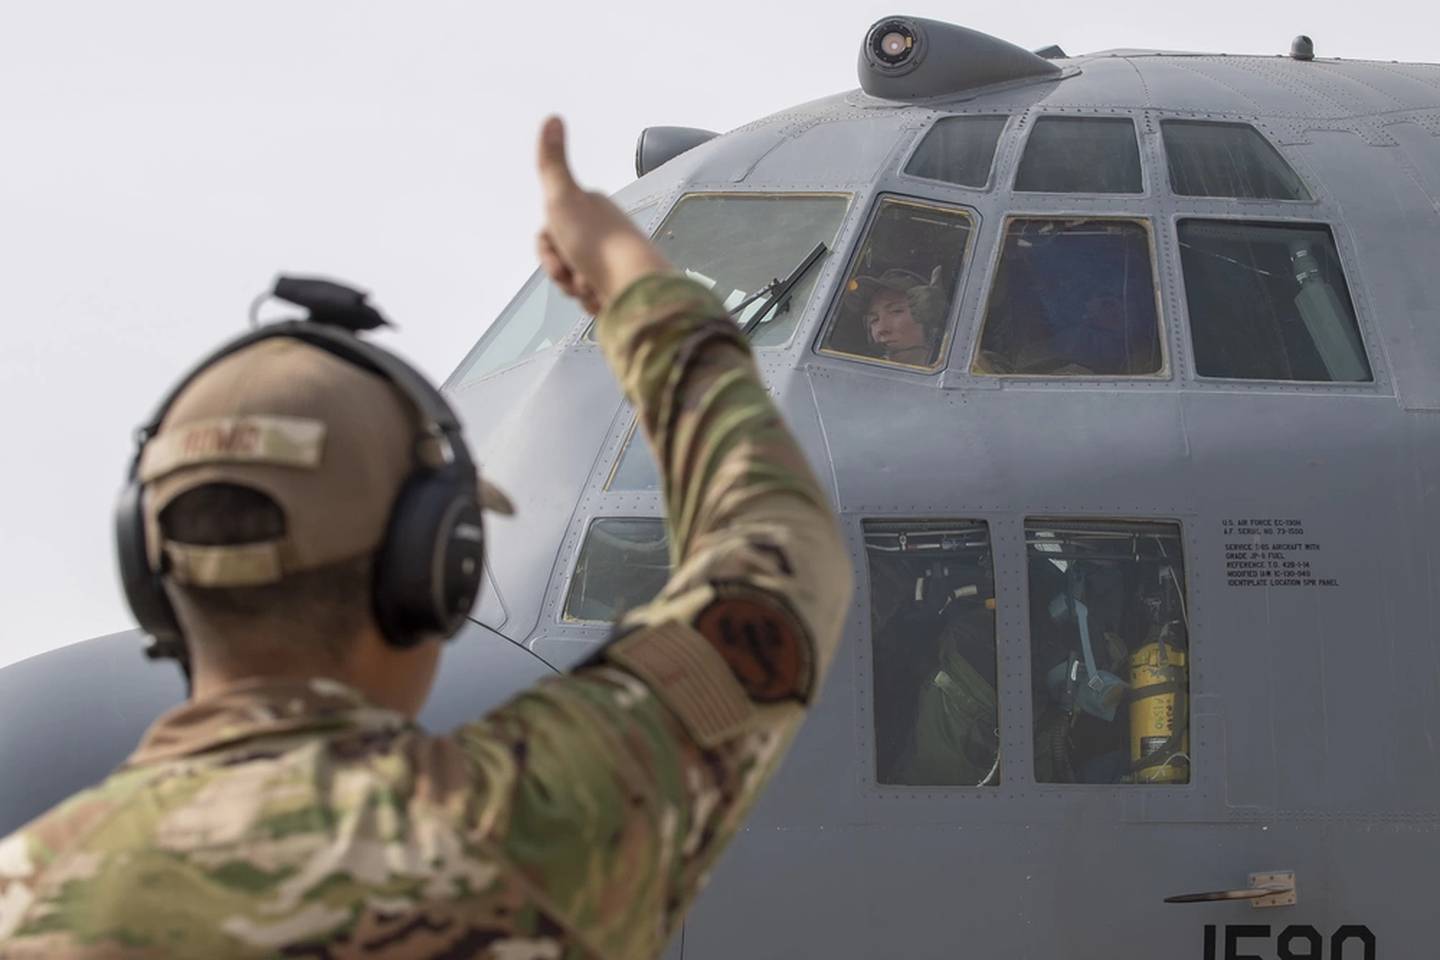 U.S. Air Force Capt. Taylor Drolshagen, 41st Expeditionary Electronic Combat Squadron pilot, signals to Airman 1st Class Logan Romo, 41st EECS airborne maintenance technician, as she starts the engine of an EC-130H Compass Call aircraft in preparation for a large force employment exercise at Al Dhafra Air Base, United Arab Emirates, July 13, 2021. (Master Sgt. Wolfram M. Stumpf/Air Force)